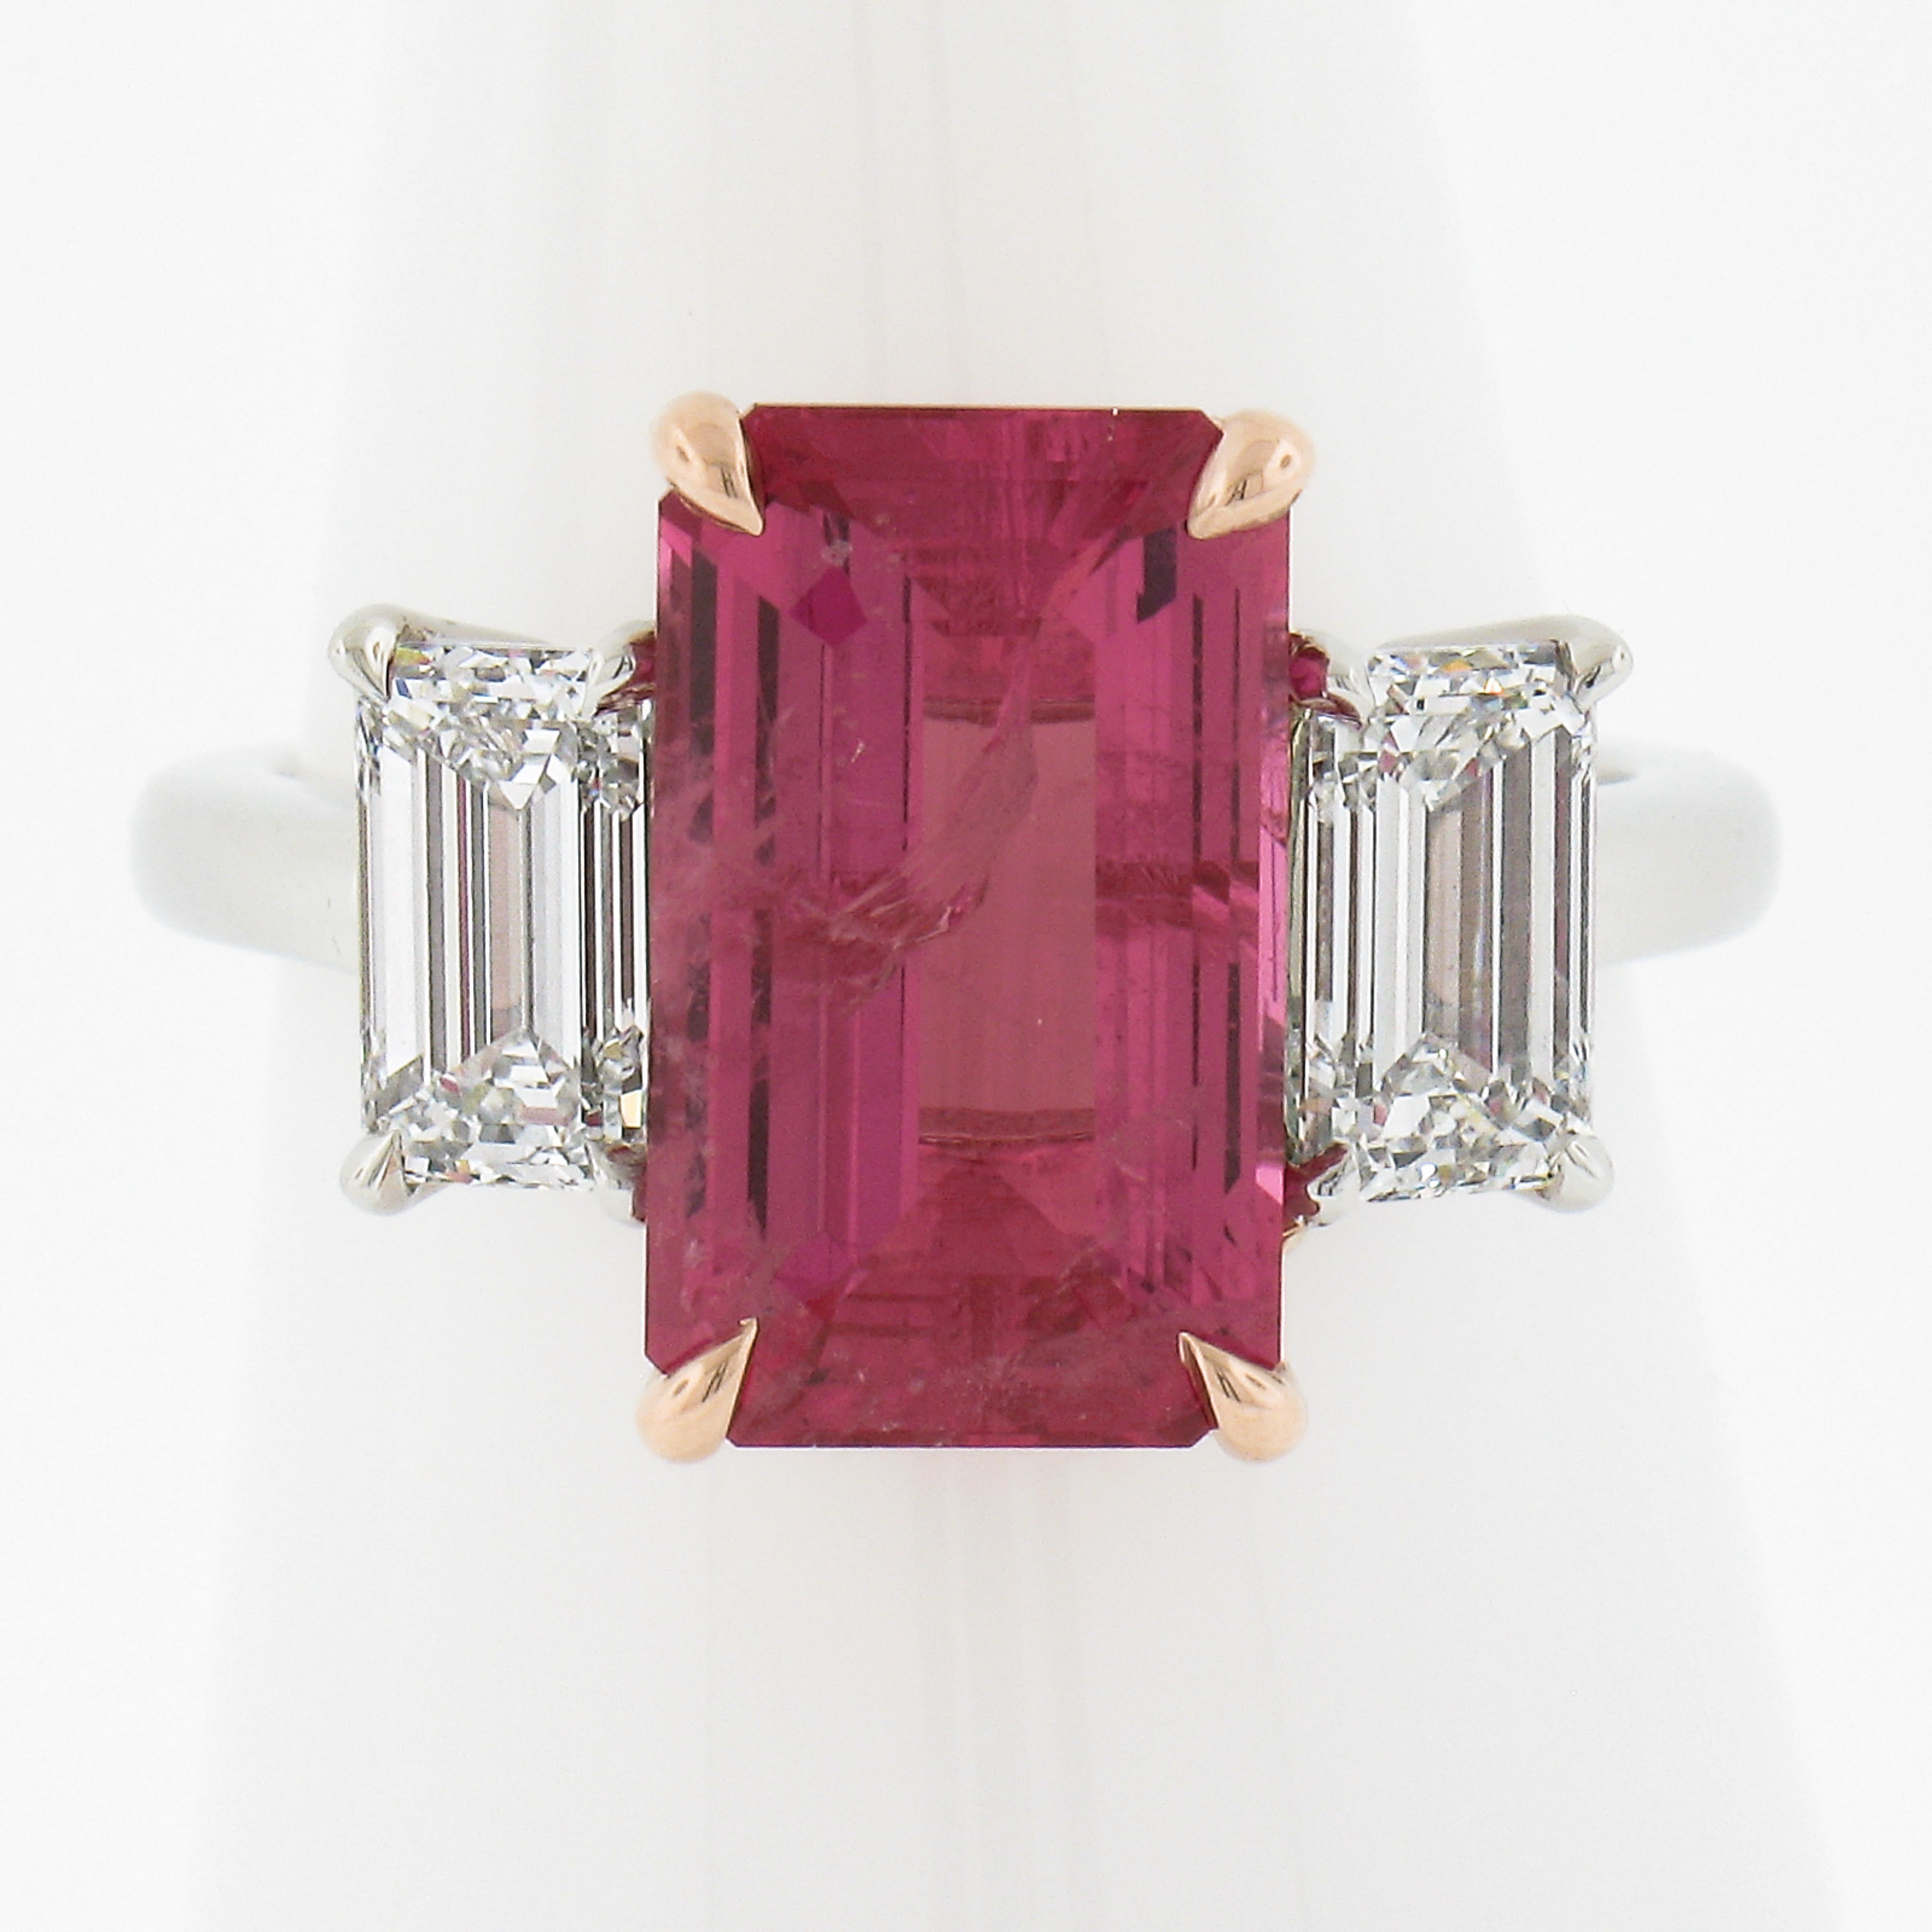 --Stone(s):--
(1) Natural Genuine Spinel - Octagonal Cut - Claw Prong Set - Deep Pink Color w/ Natural Inclusions - NO HEAT - 4.01ct (exact - certified)
** See Certification Details Below for Complete Info **
(2) Natural Genuine Diamonds - Emerald